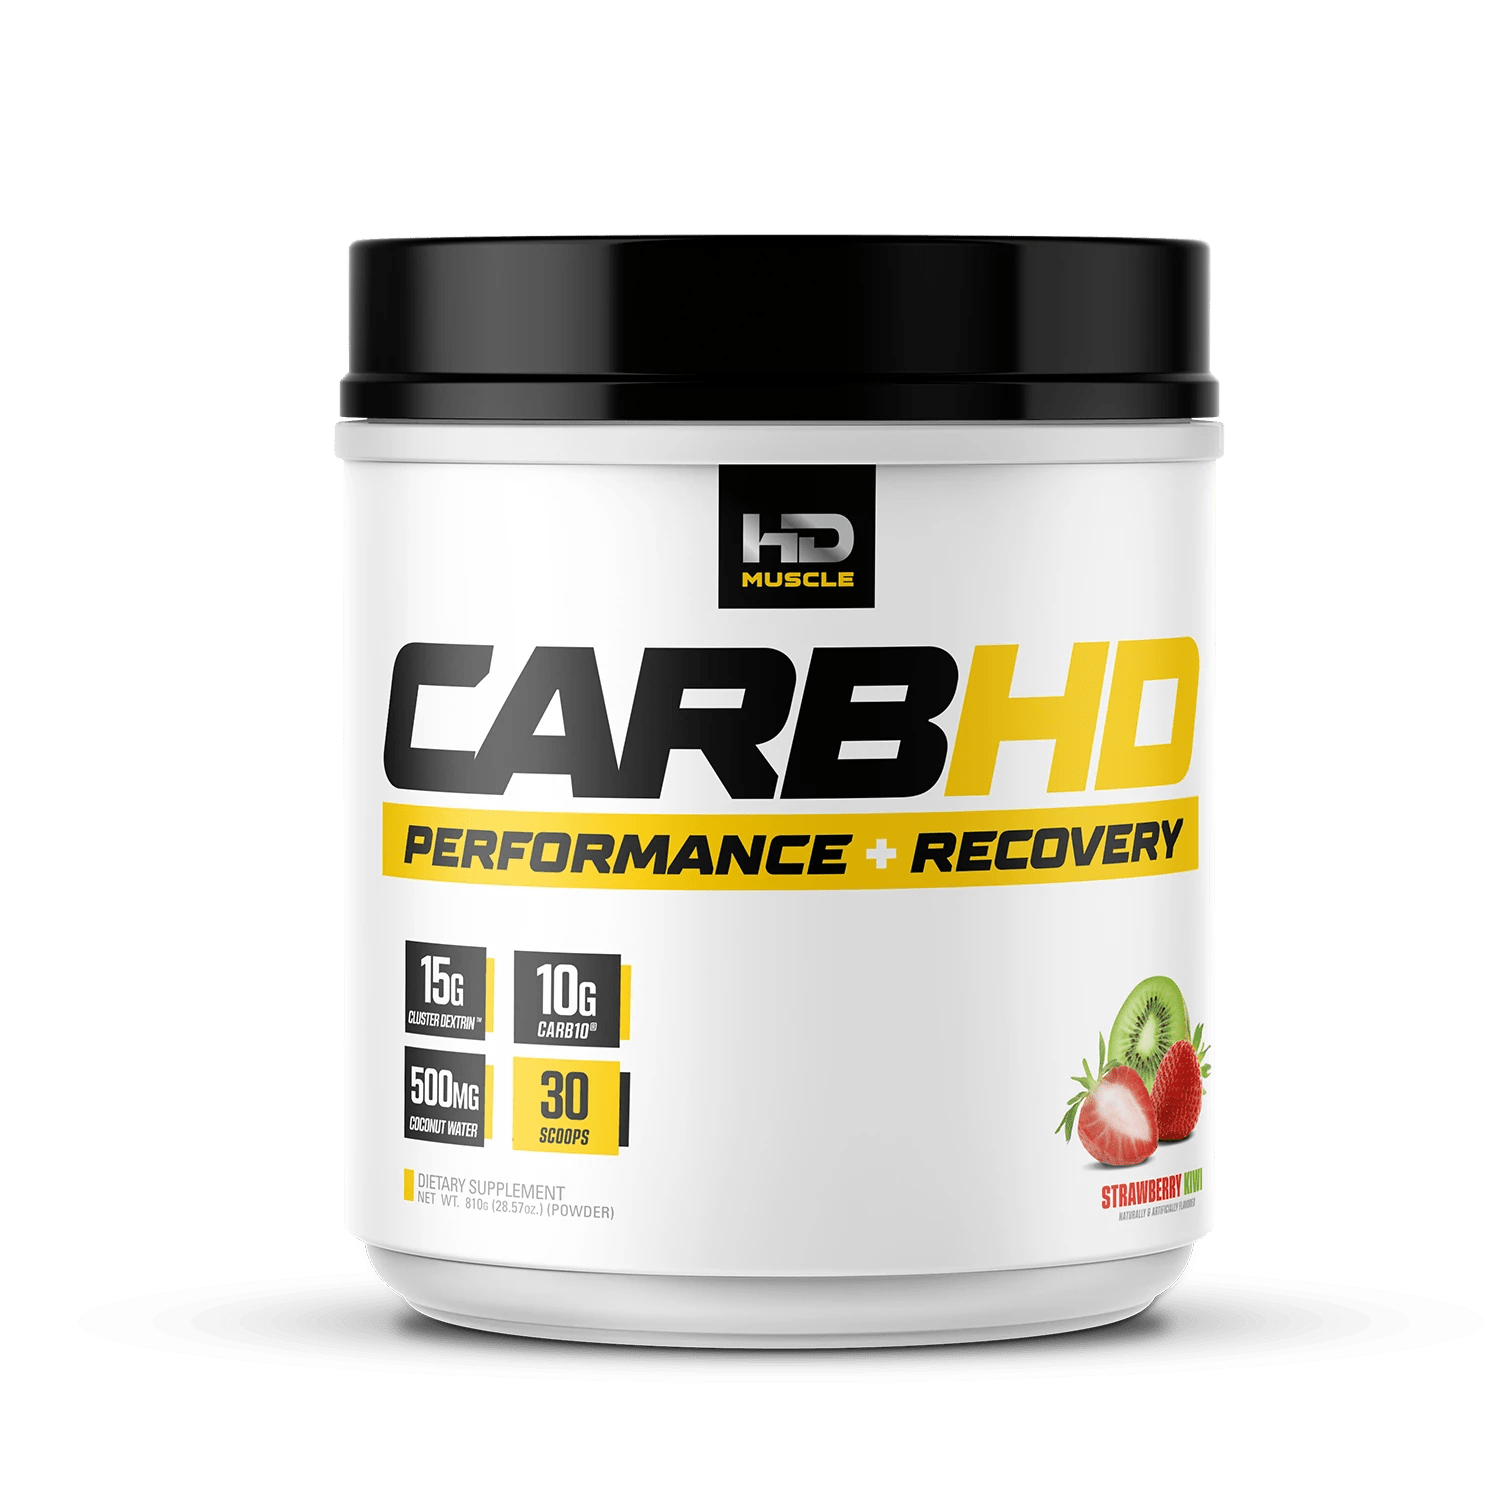 HD Muscle CarbHD 832g